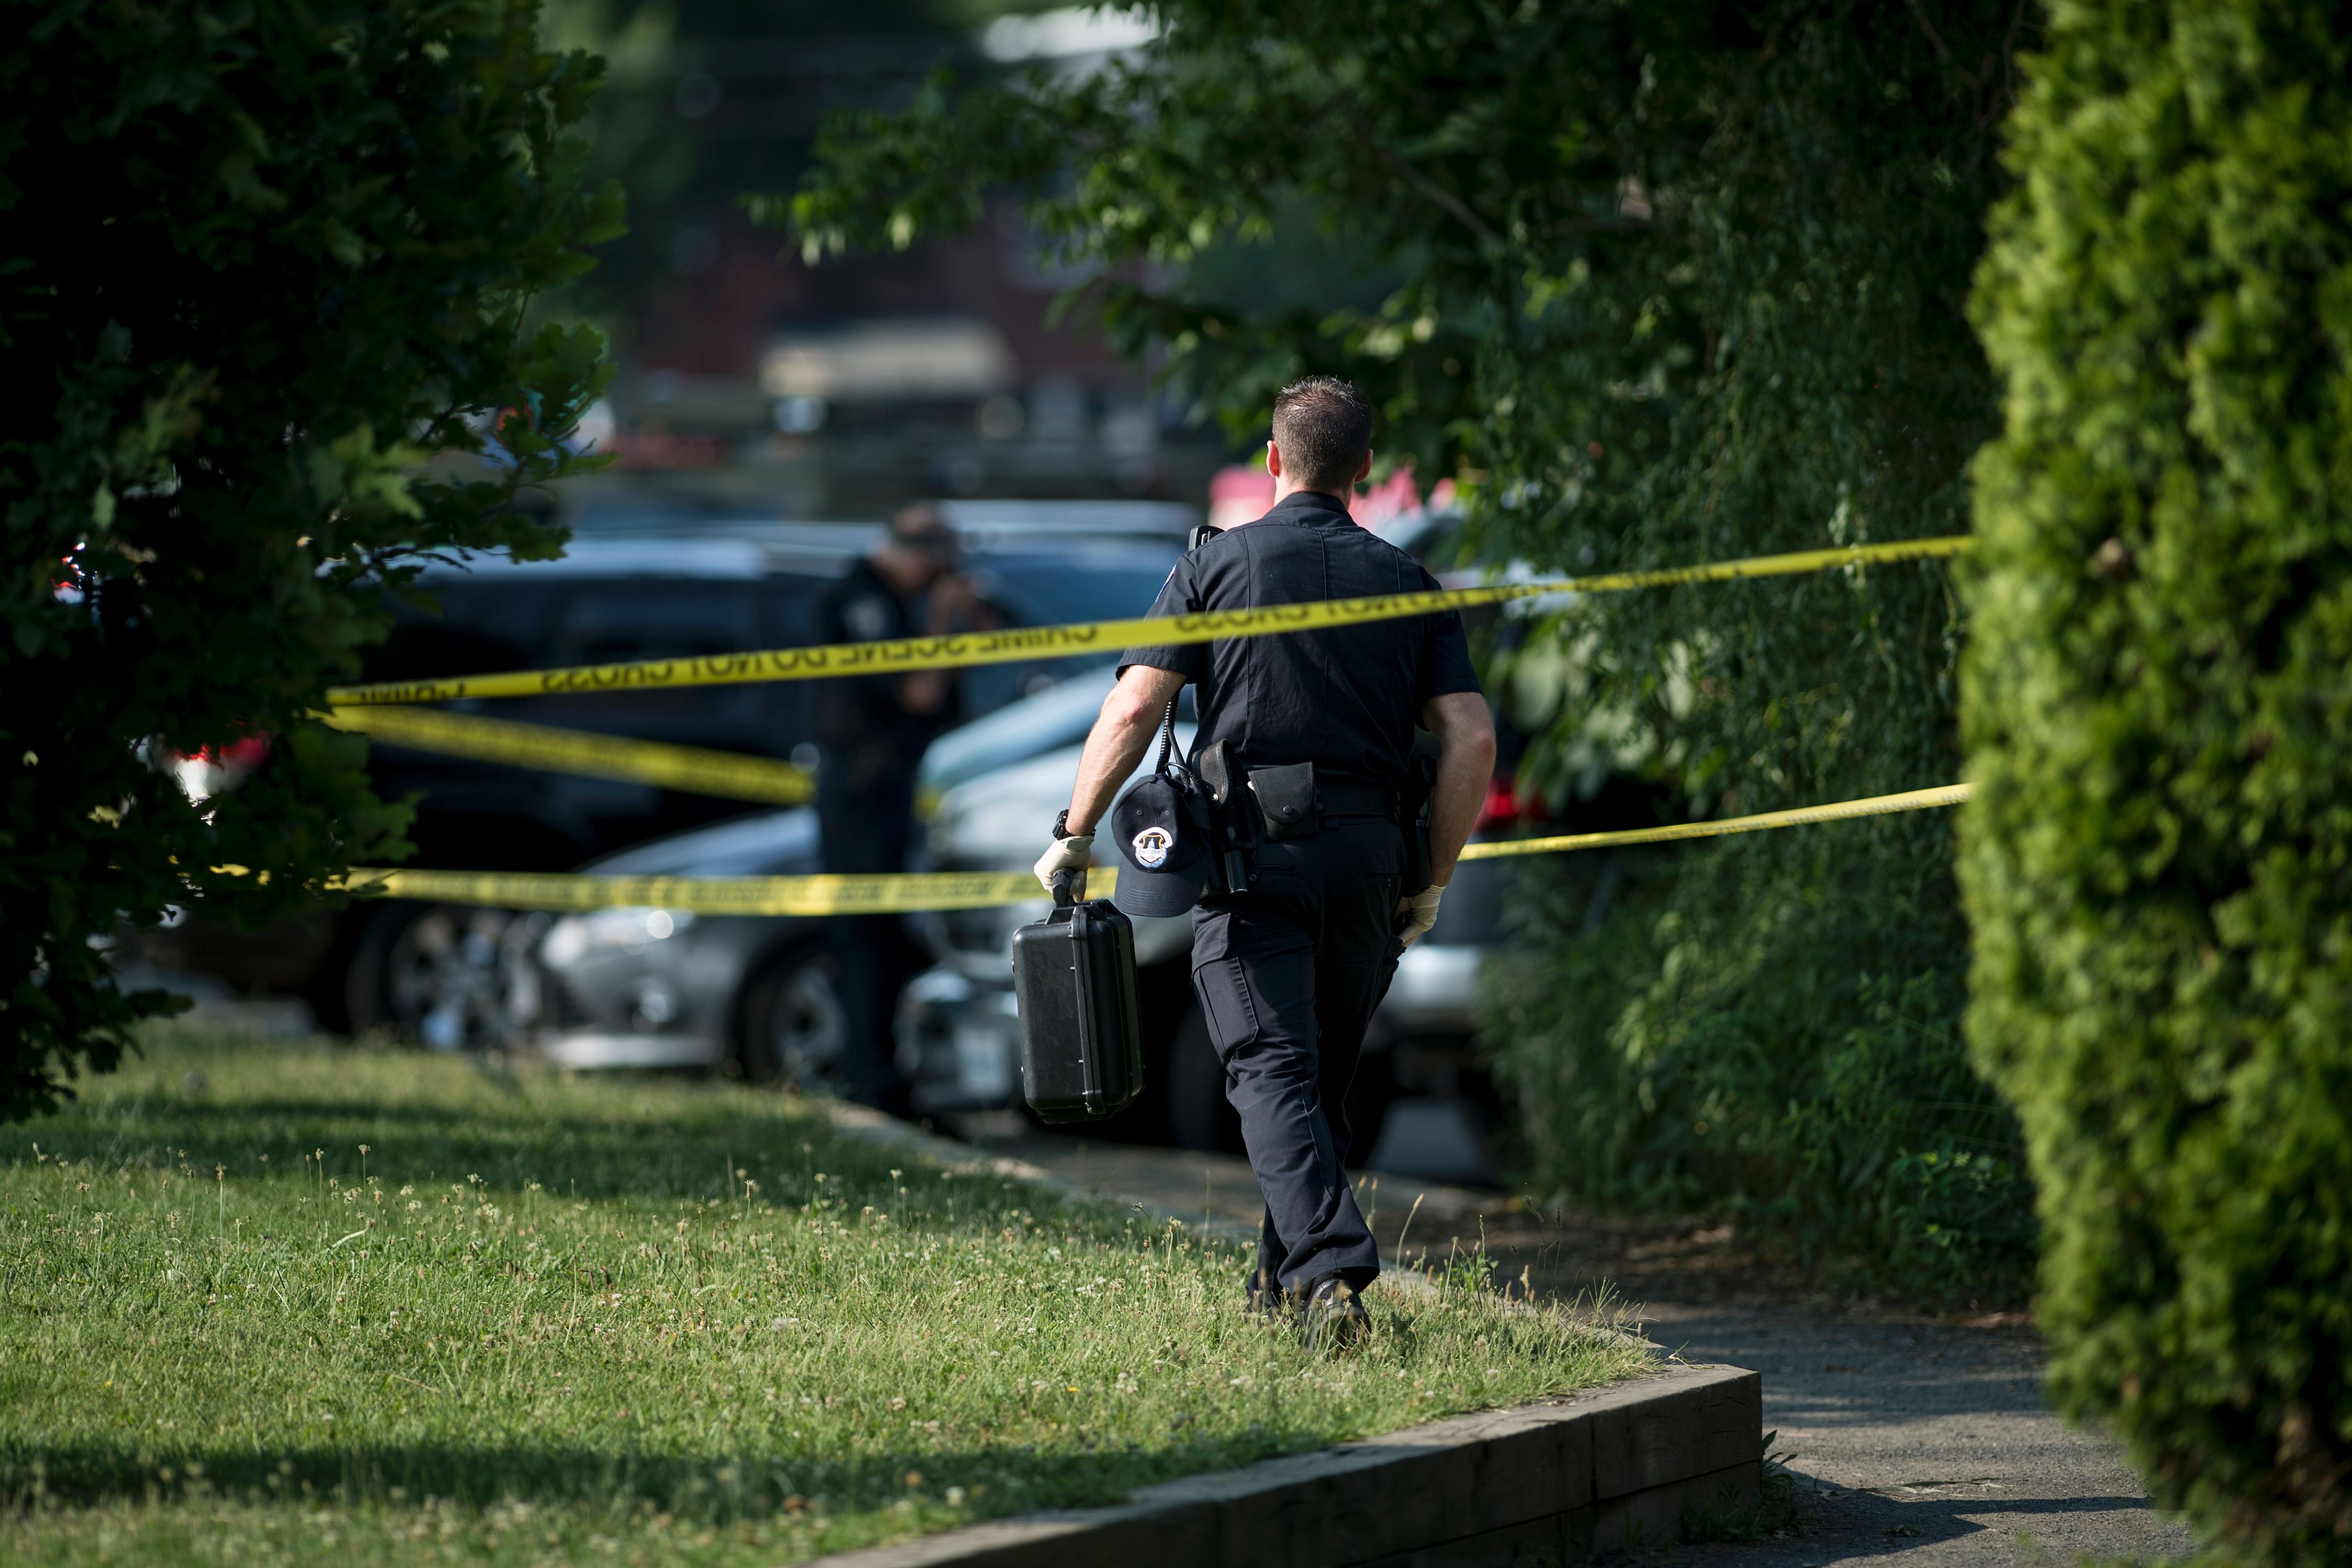 A policeman on the scene of the congressional shooting.